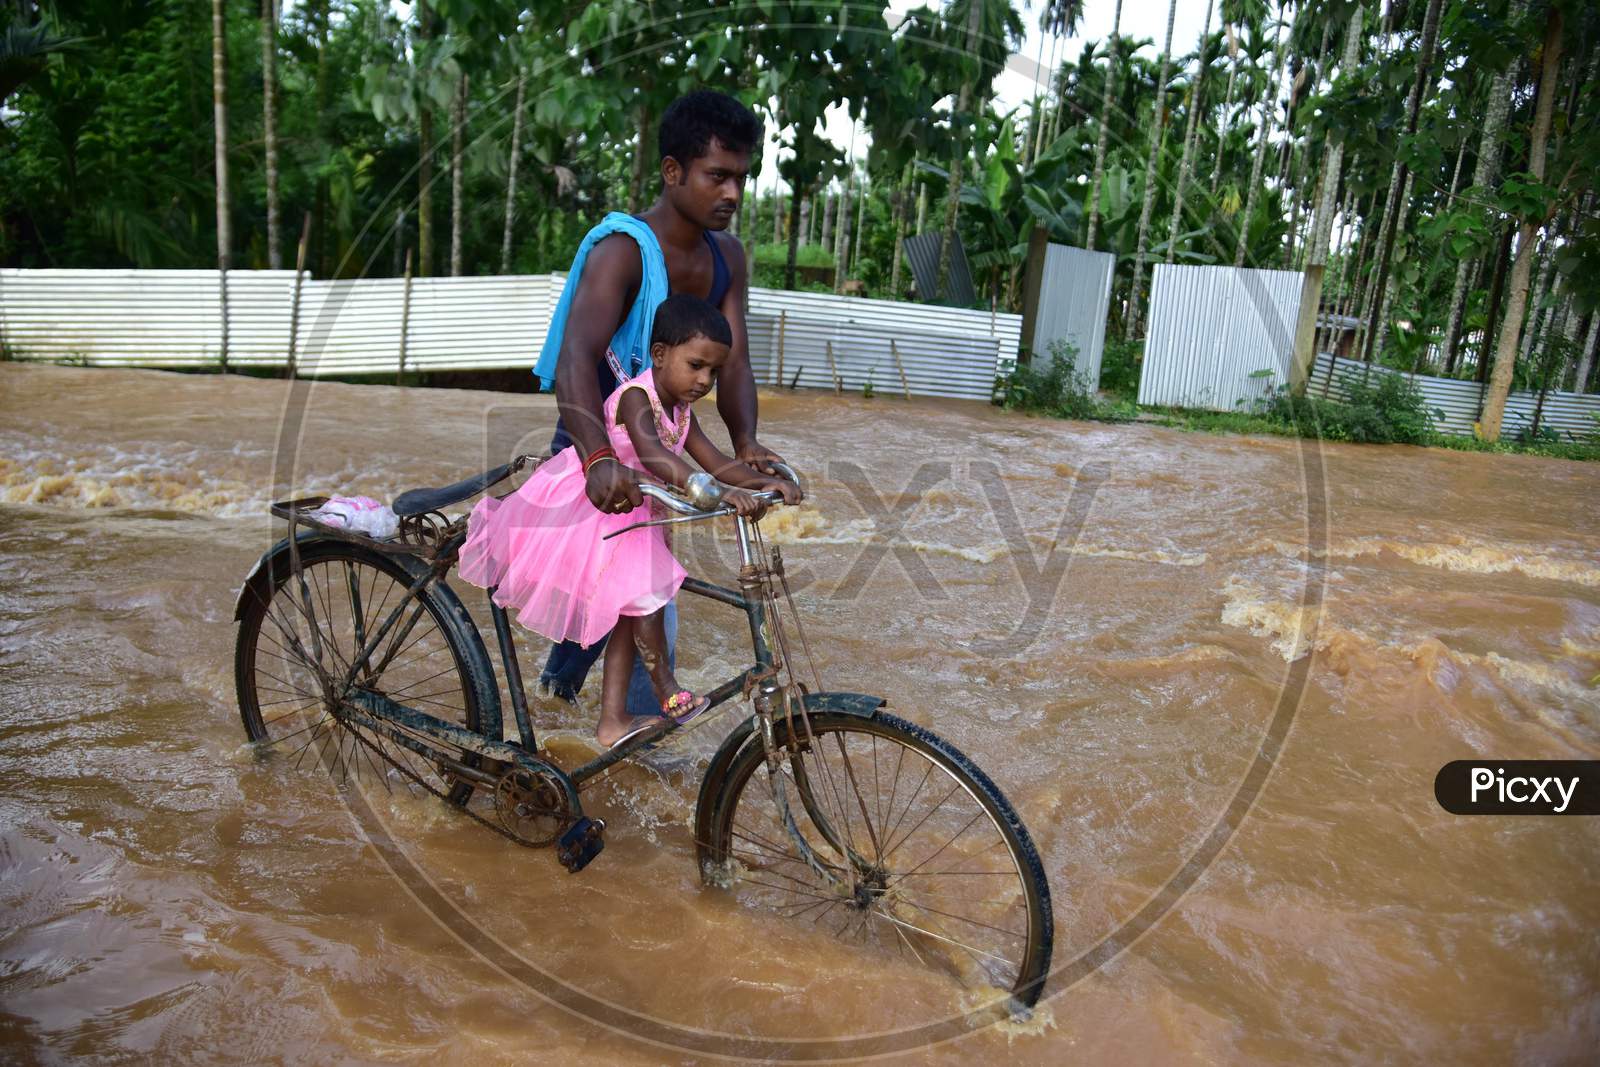 A man carries his daughter on a bicycle as he wades through a flooded area, following heavy rainfall, in Nagaon district, Sept. 25, 2020. (